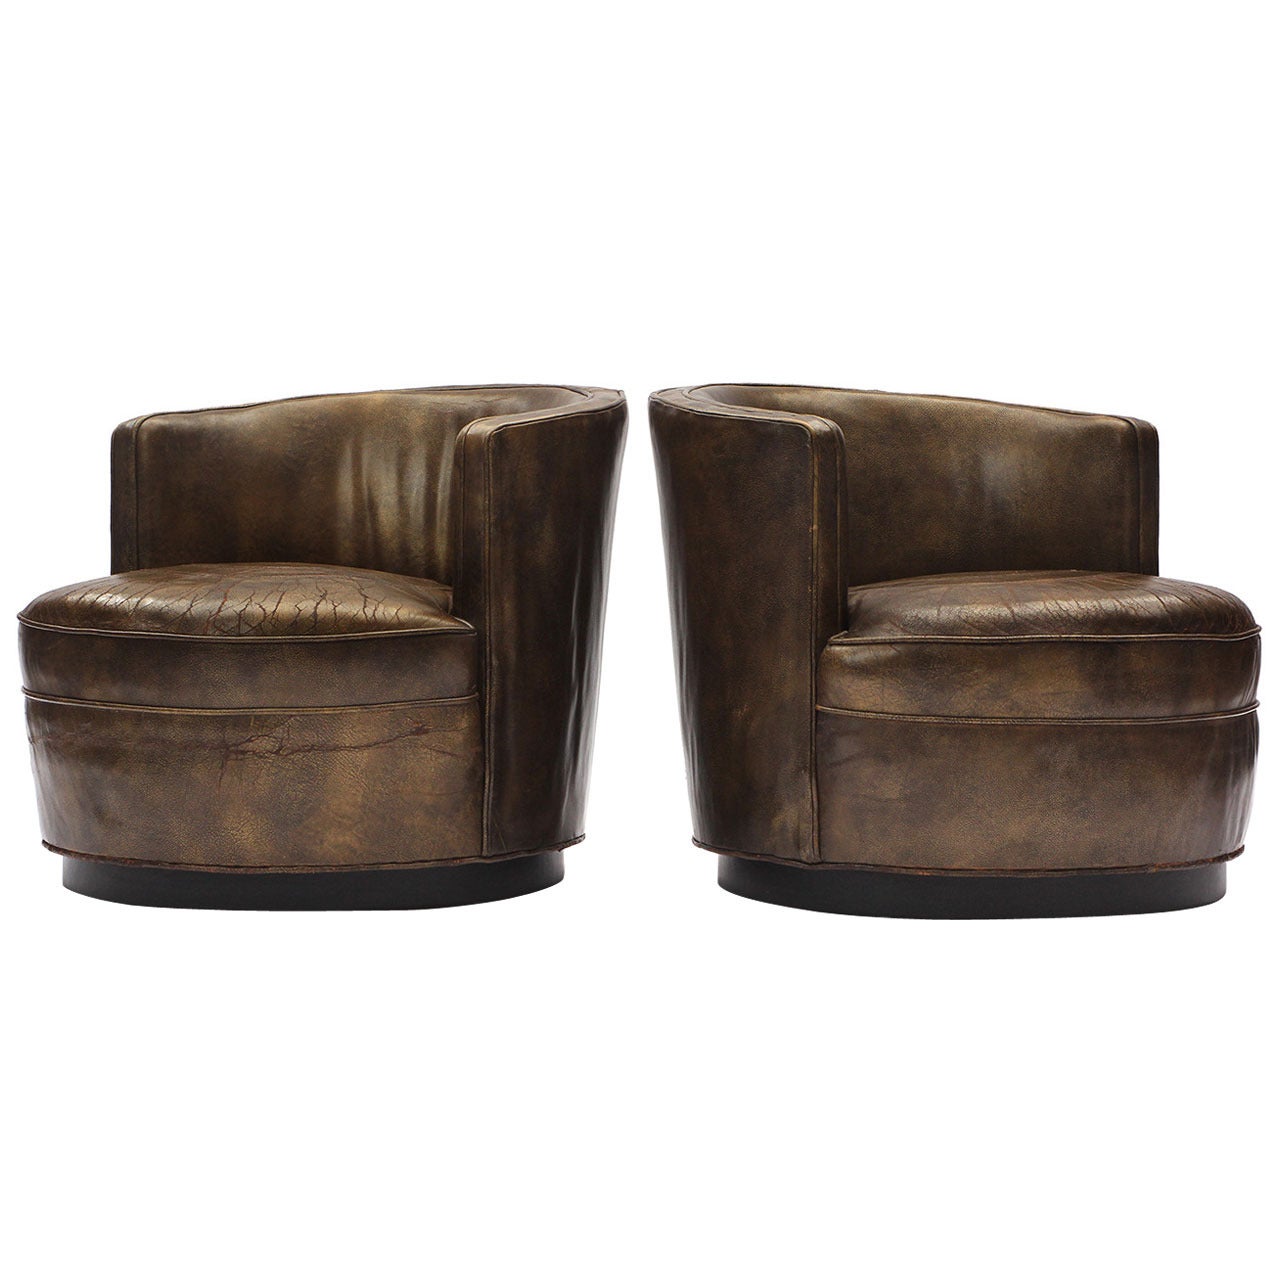 Superb Leather Barrel-Back Chairs By Edward Wormley